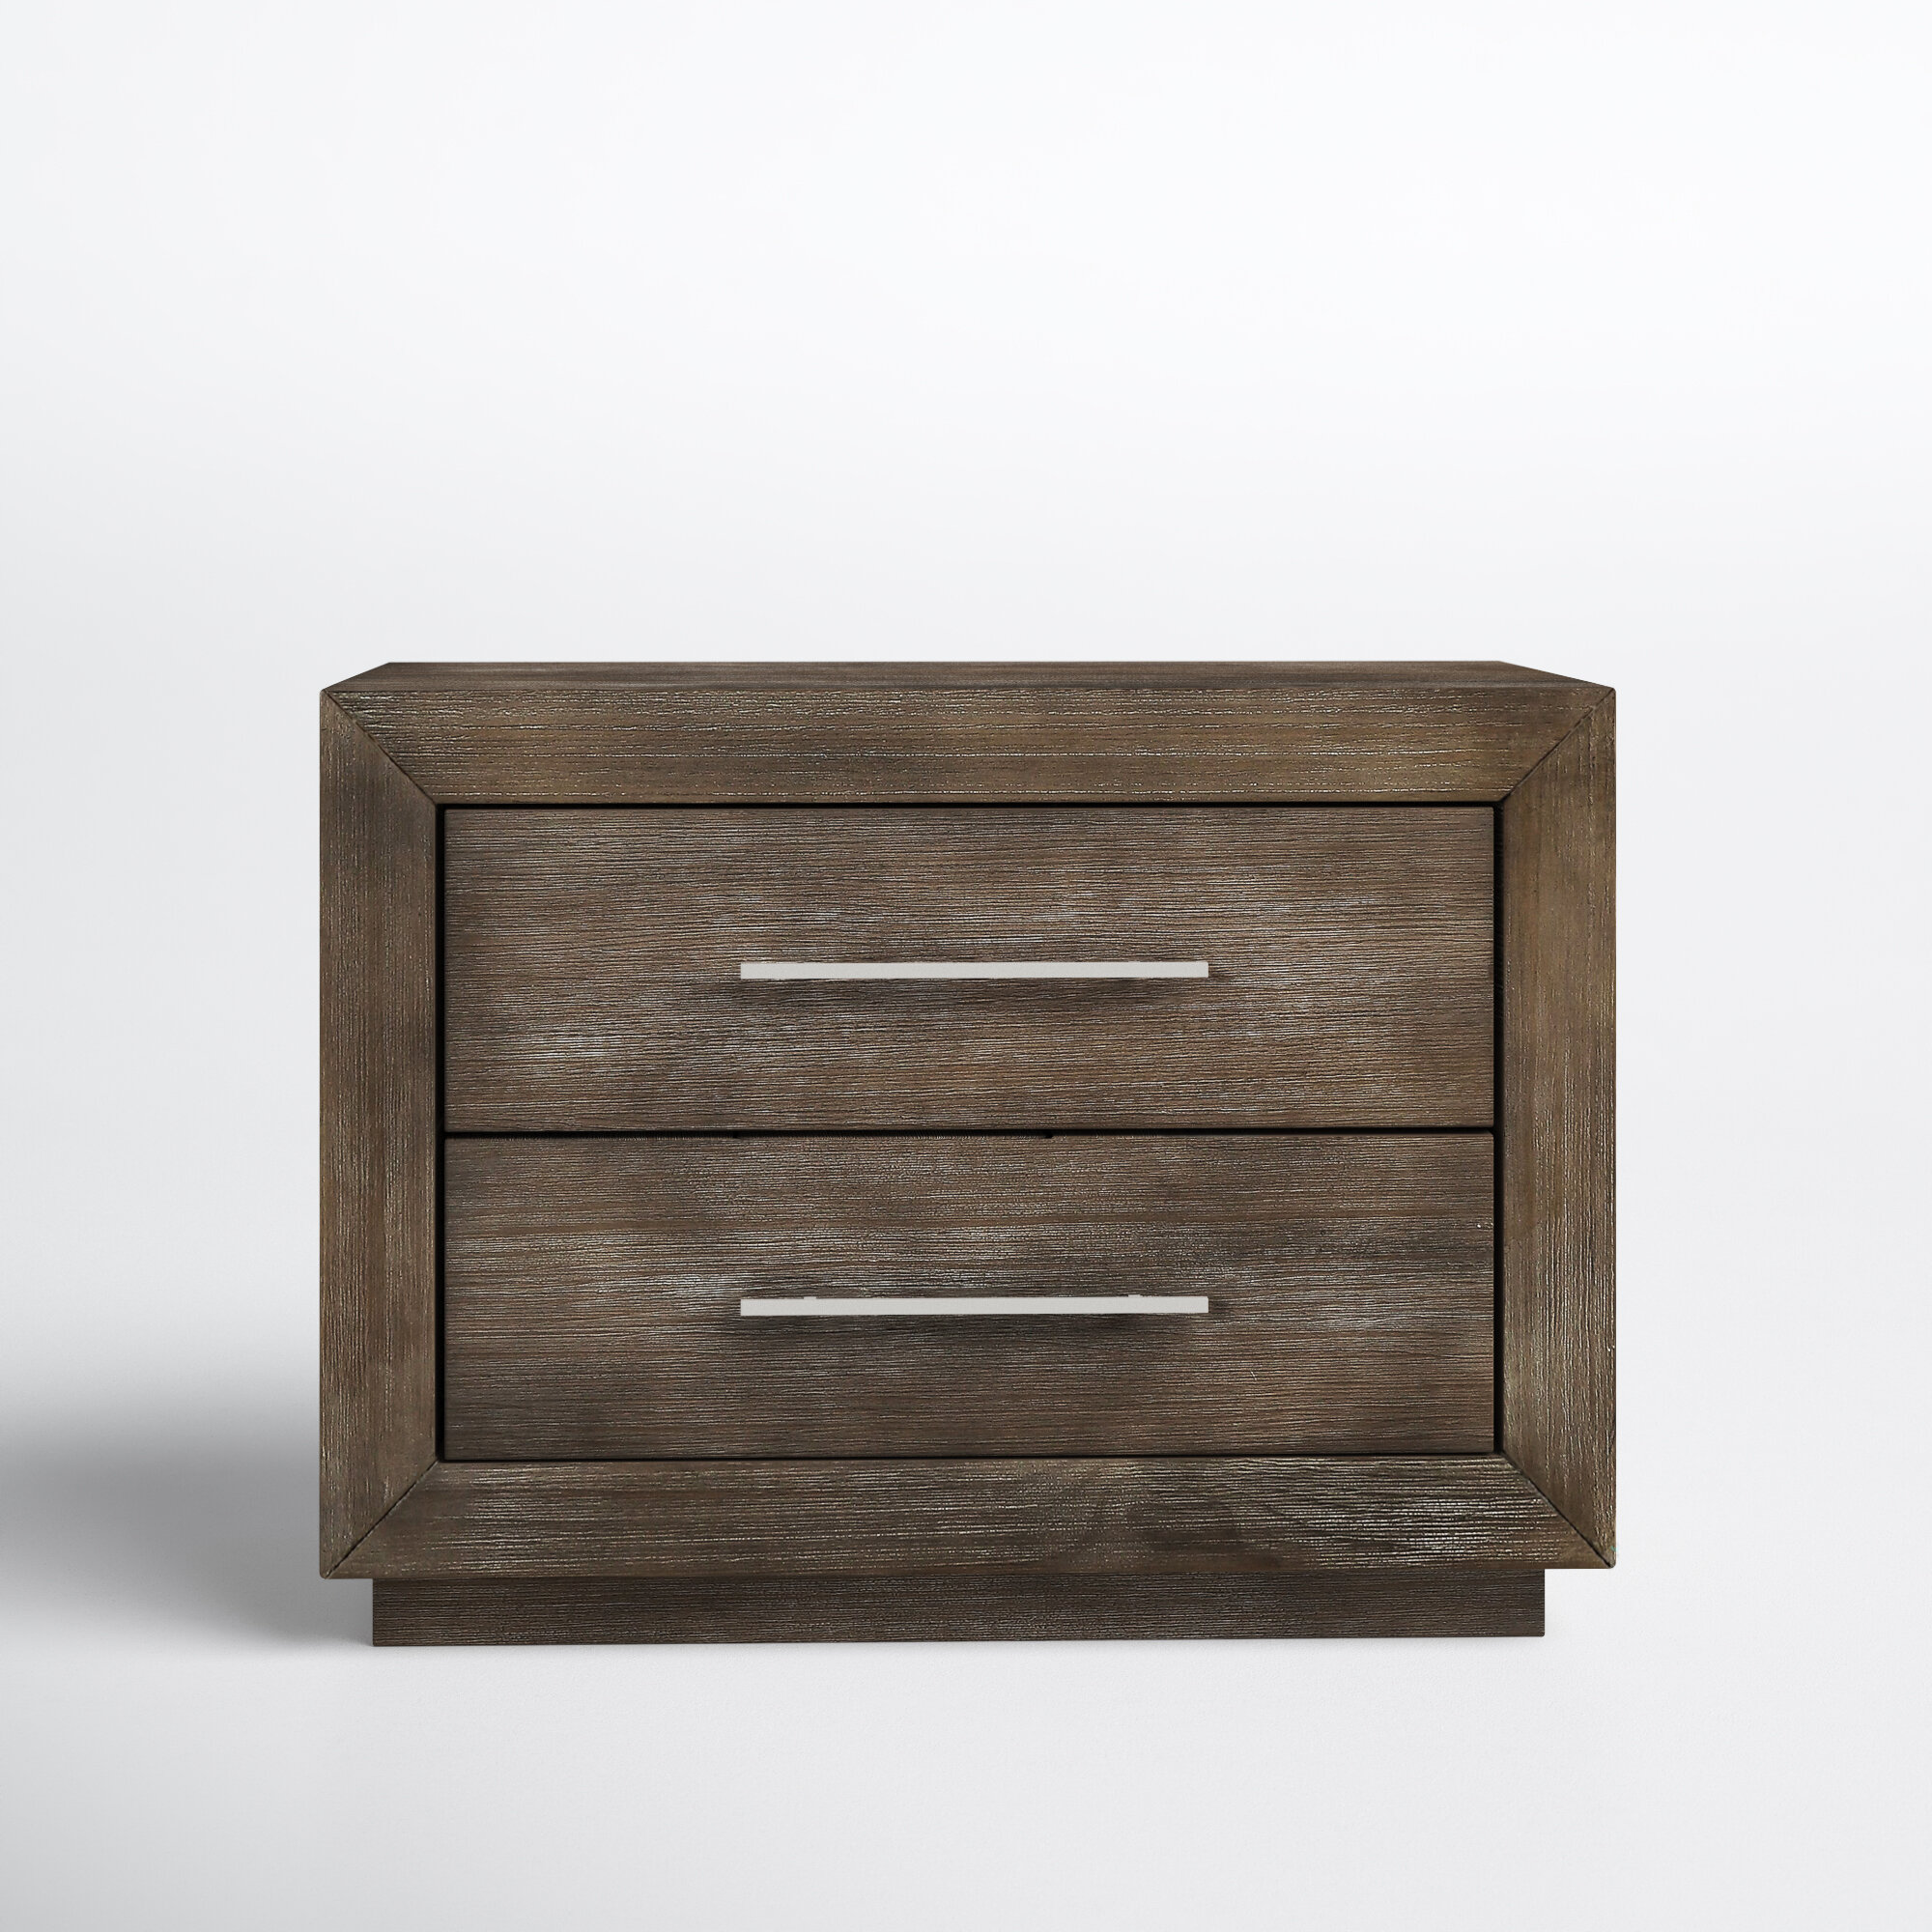 WIRED-BRUSHED RUSTIC BROWN FINISH 6-DRAWER